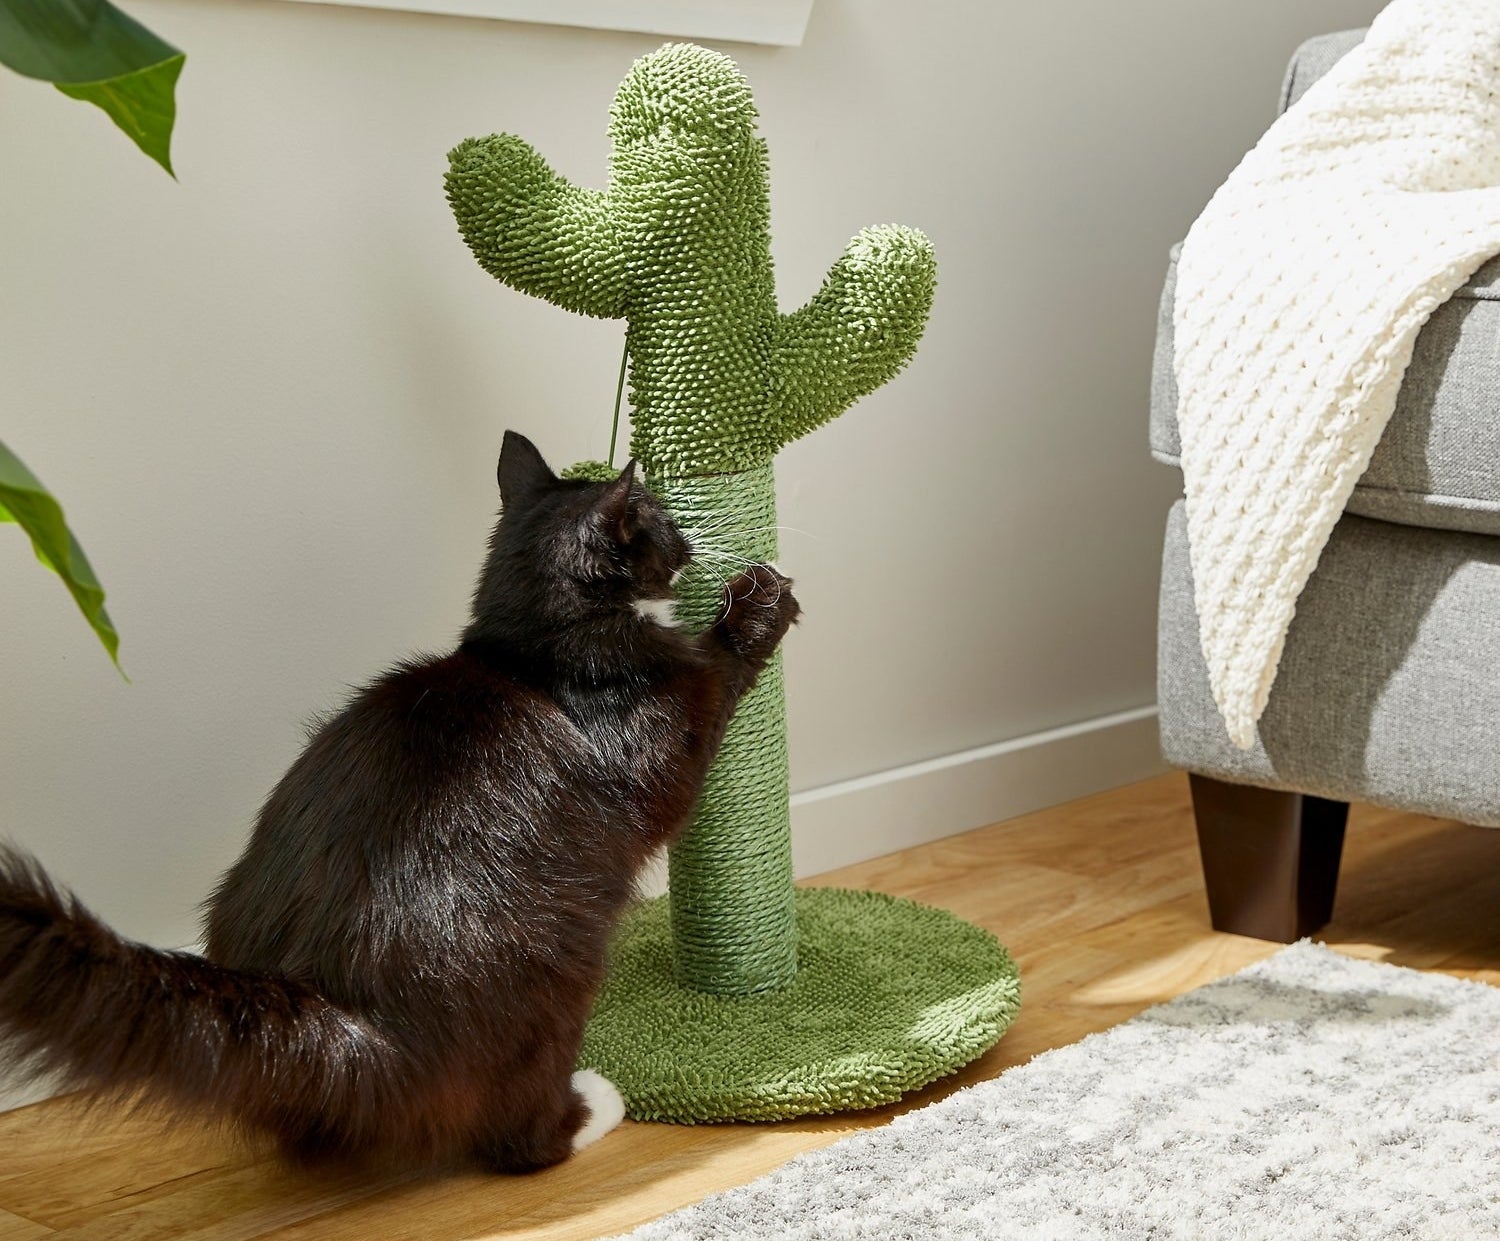 A cat scratching the cactus scratching post